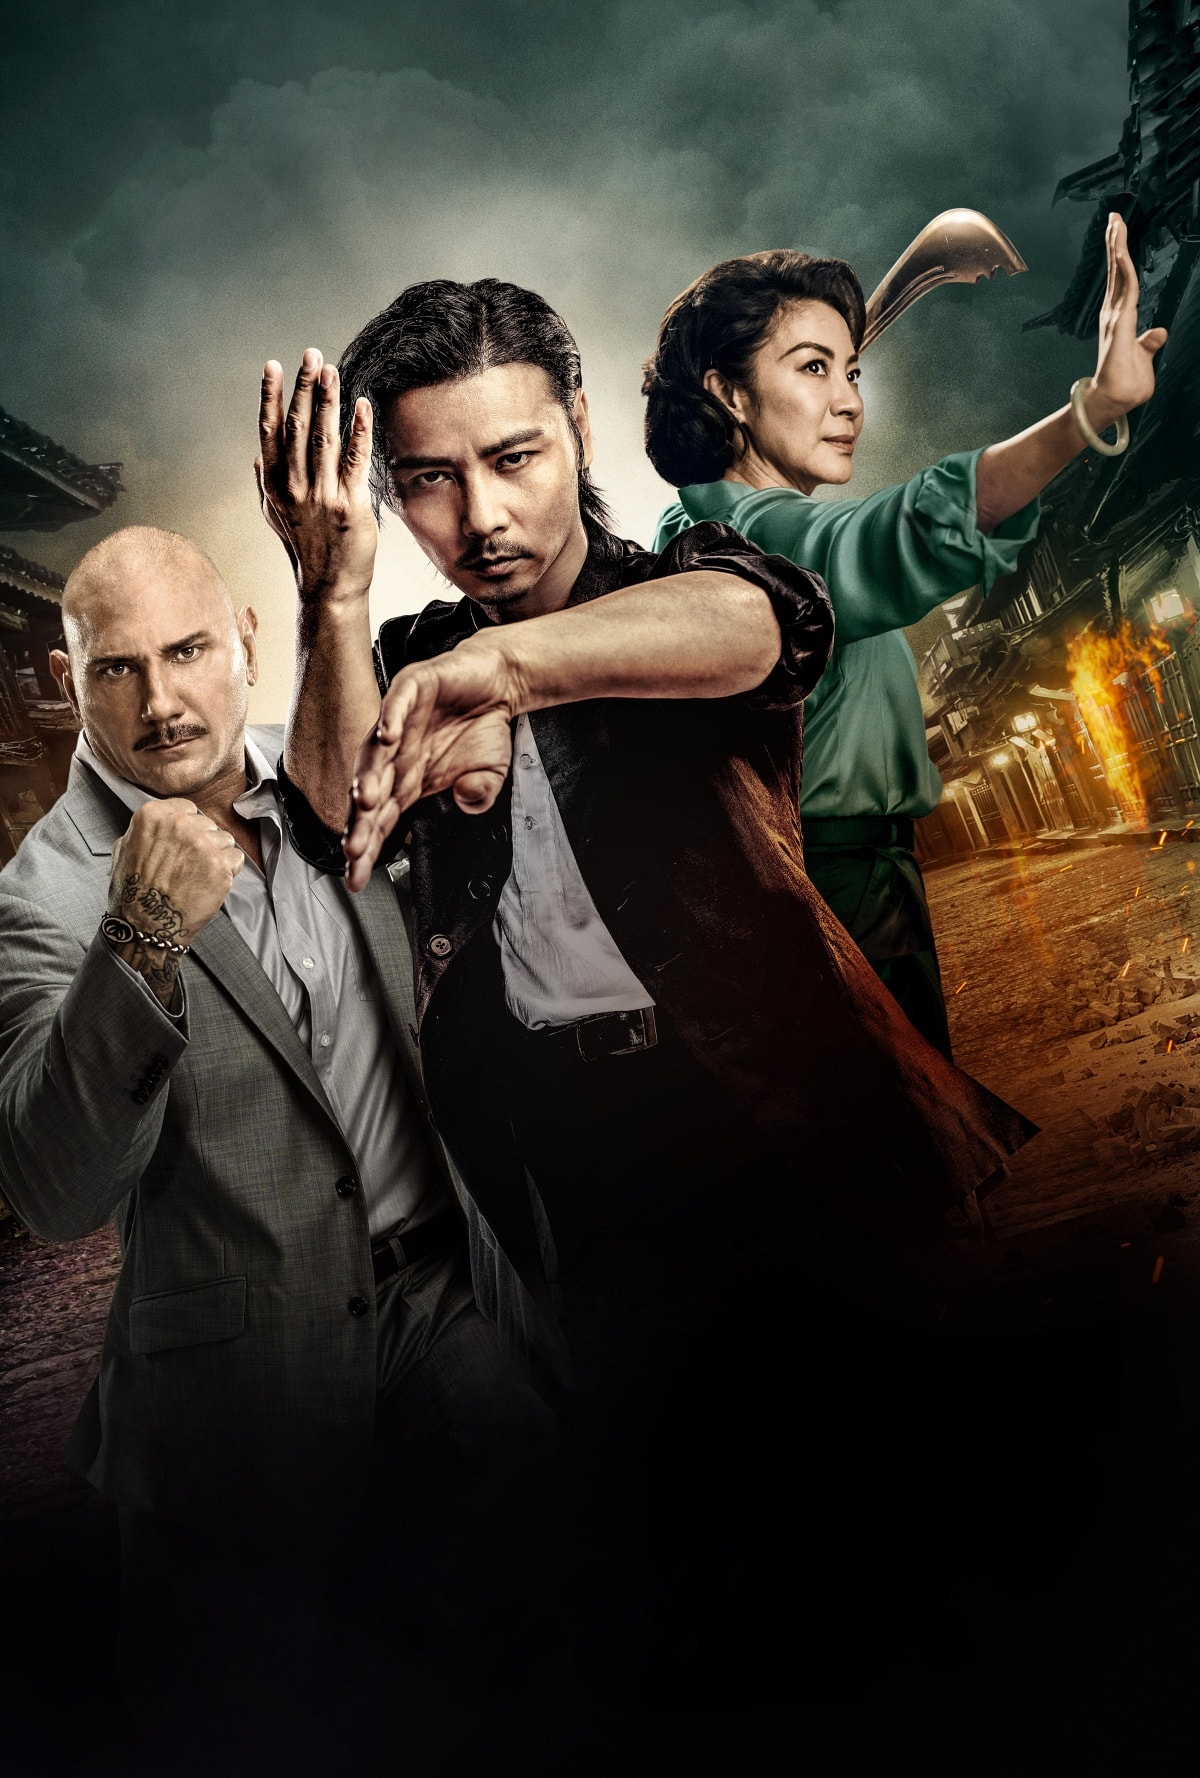 Promotional art for the 2018 Chinese martial arts film Master Z: Ip Man Legacy